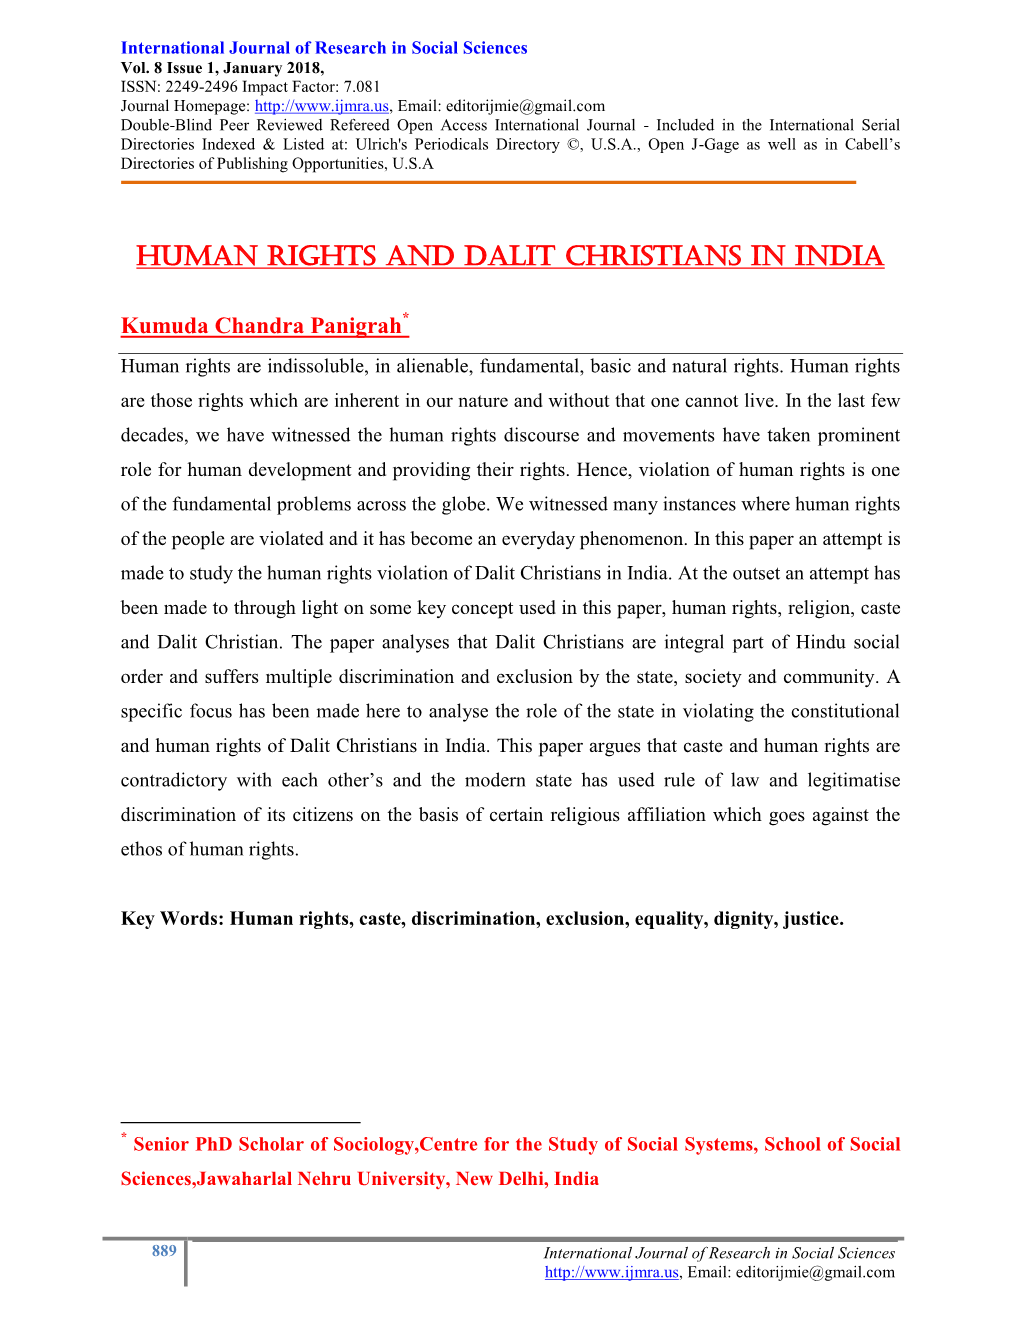 Human Rights and Dalit Christians in India